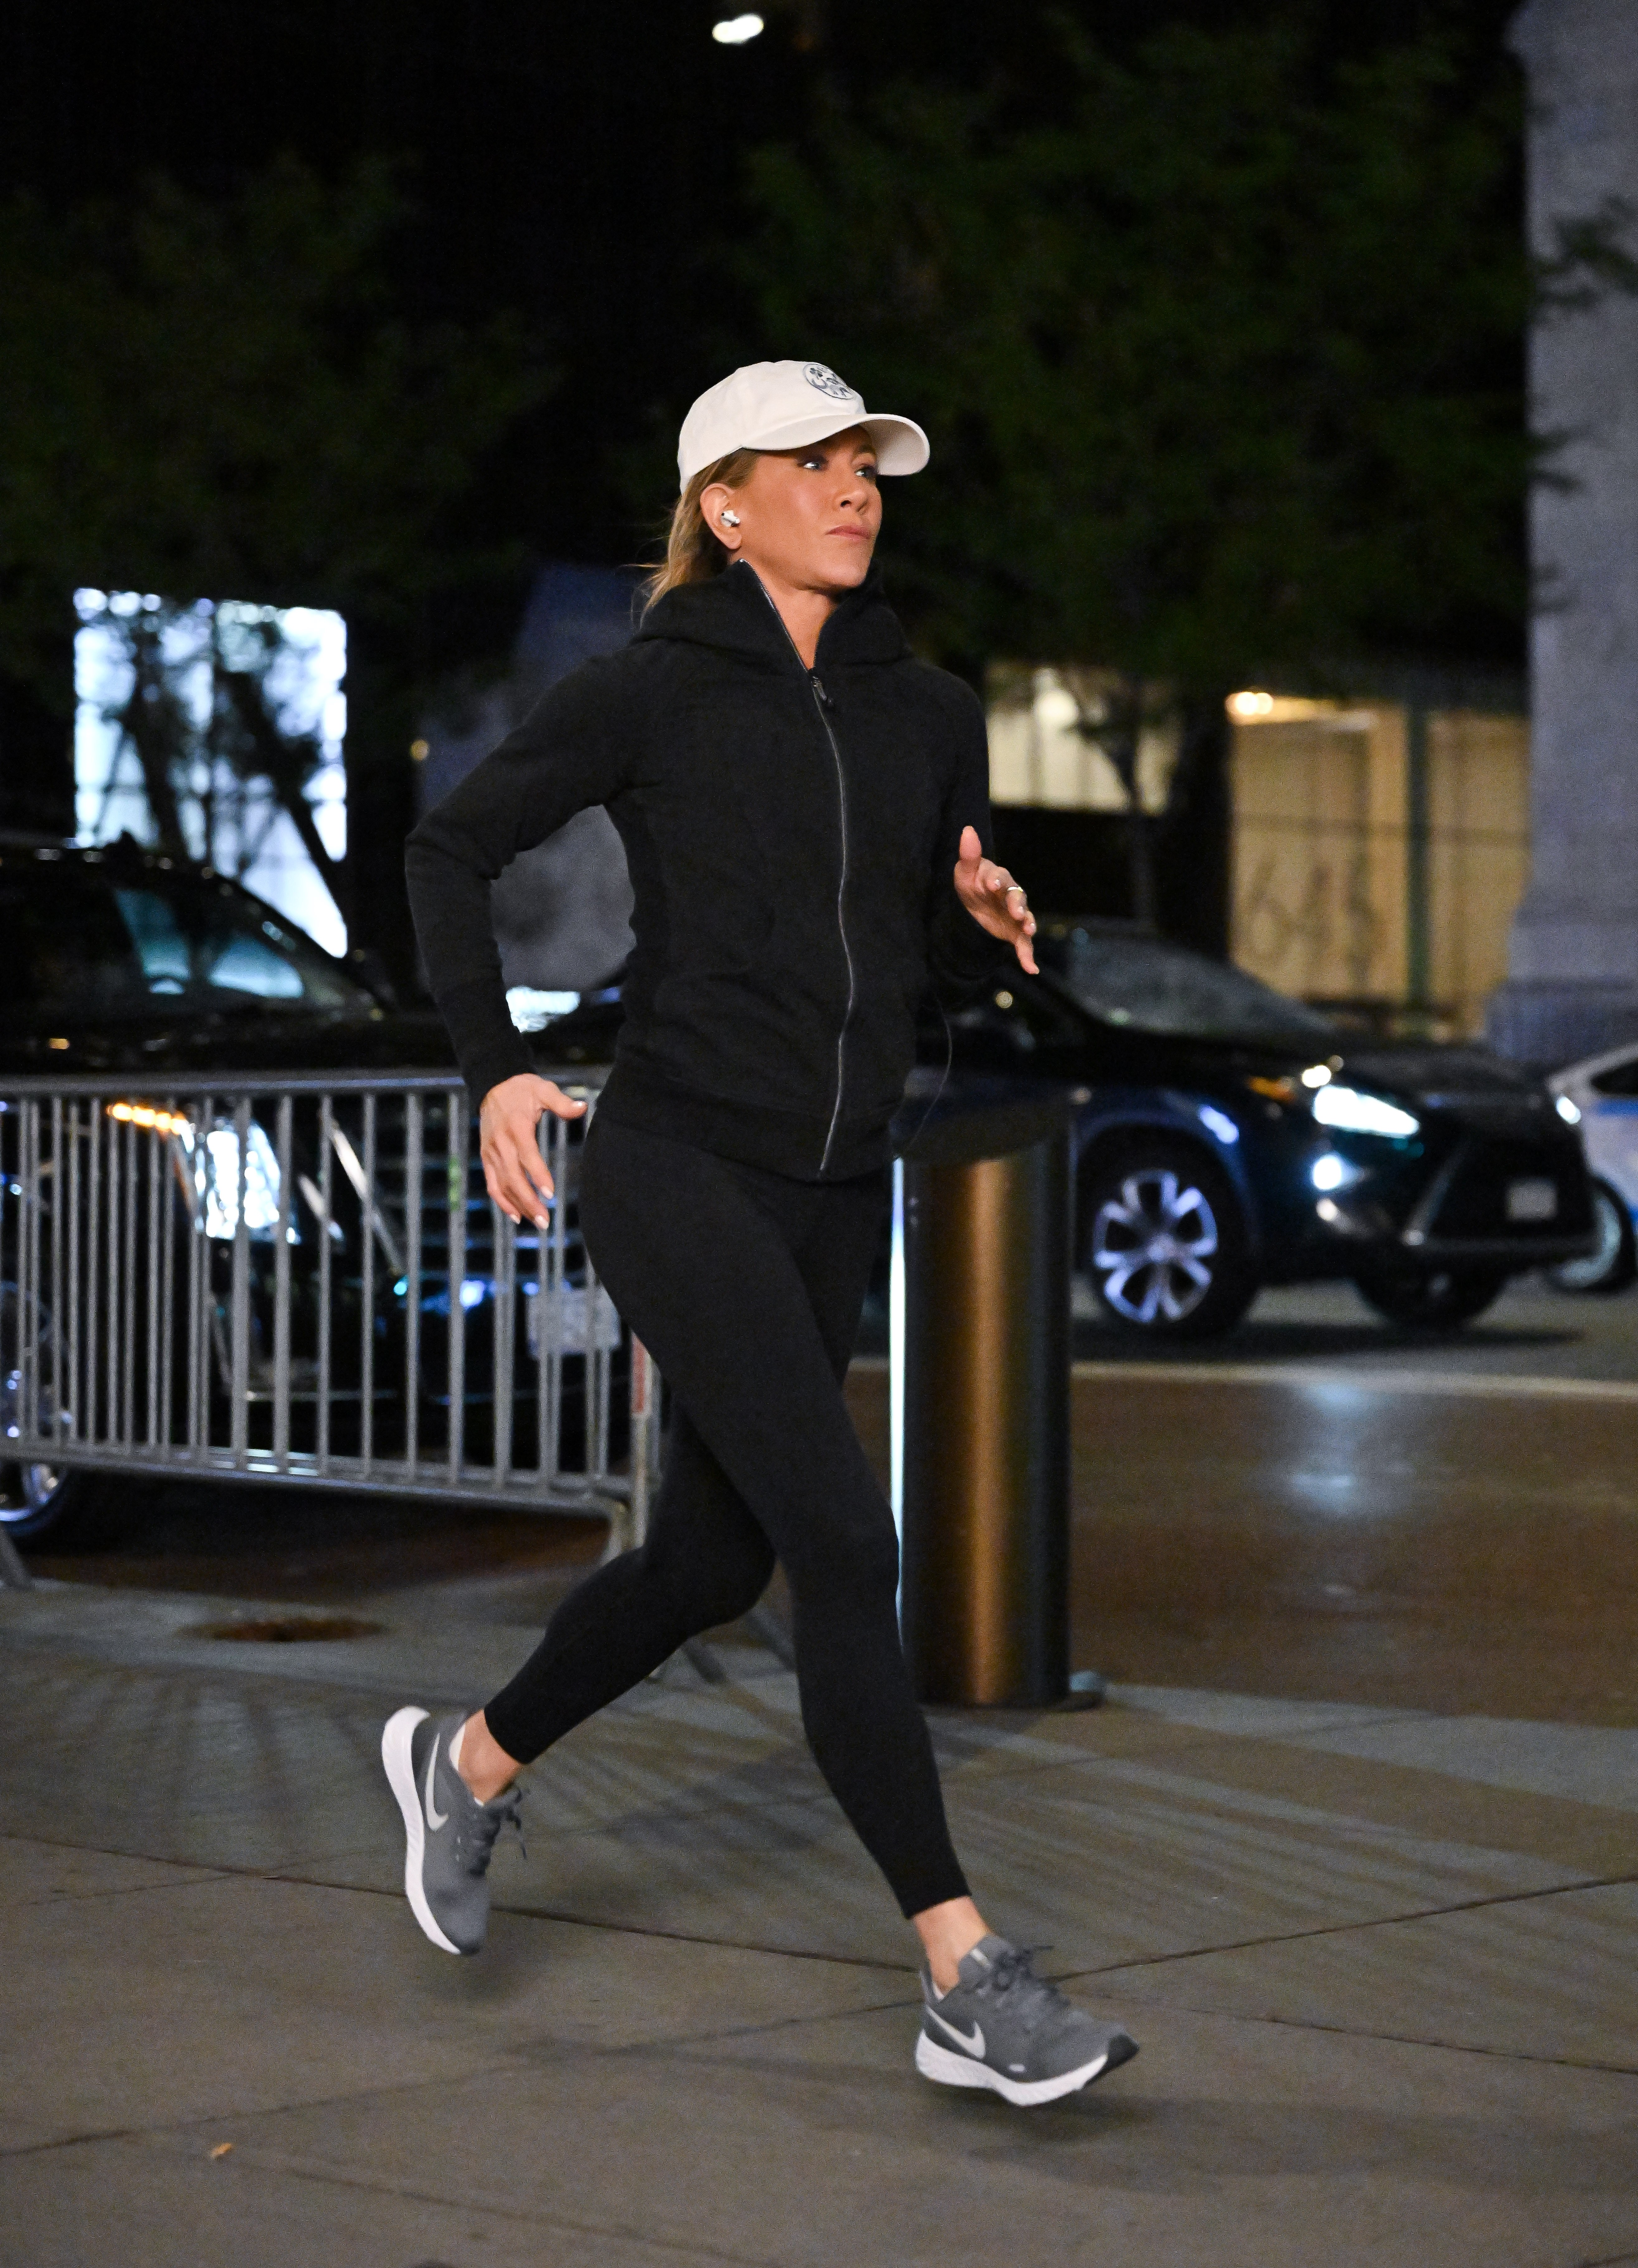 NEW YORK, NEW YORK - SEPTEMBER 30:  Jennifer Aniston is seen jogging while filming on location for 'The Morning Show' on 5th Avenue on September 30, 2022 in New York City. (Photo by James Devaney/GC Images) (Foto: GC Images)